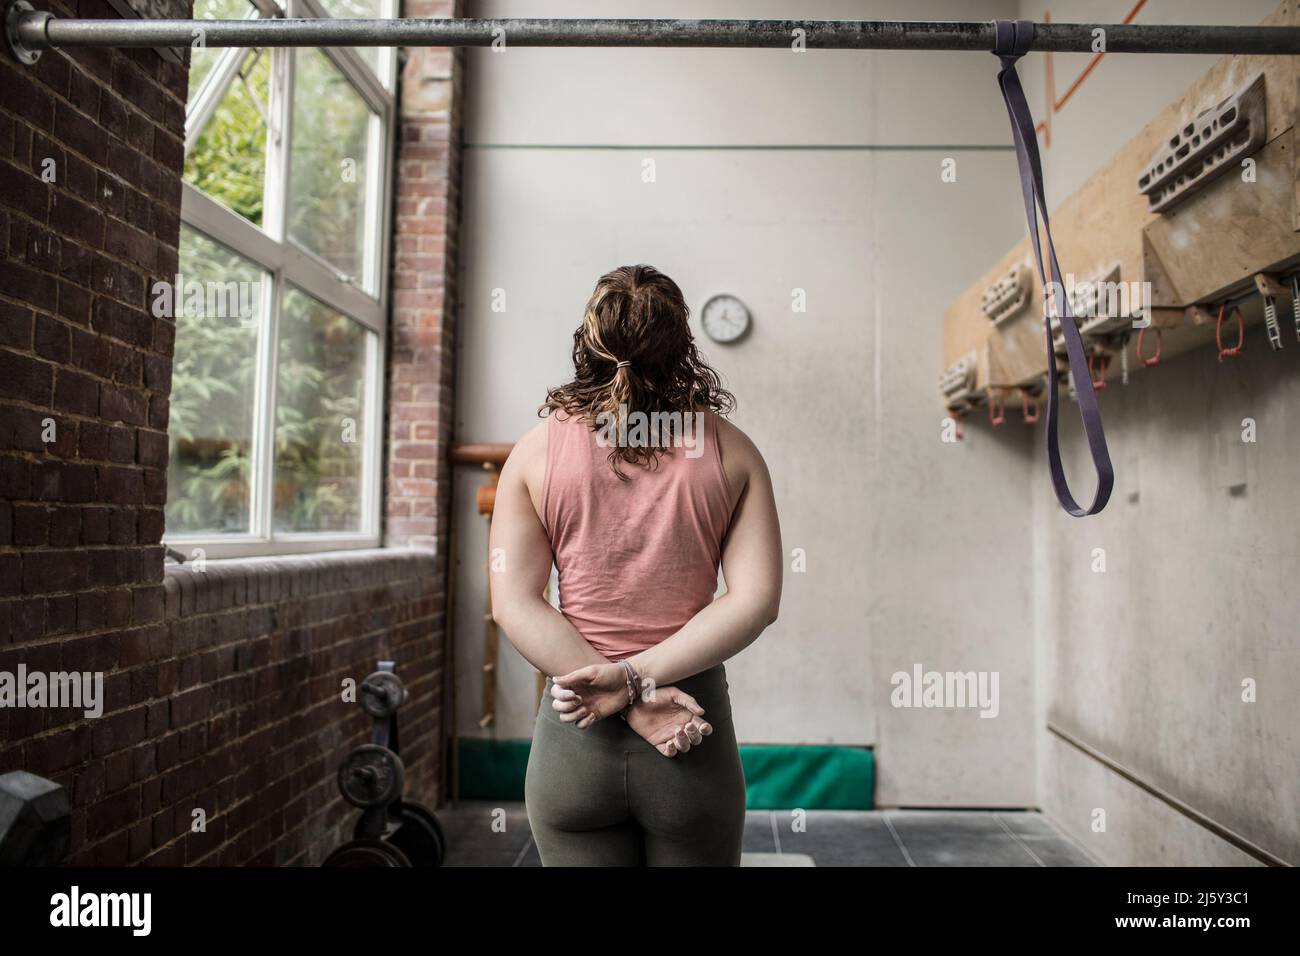 Dedicated young woman exercising in gym Stock Photo